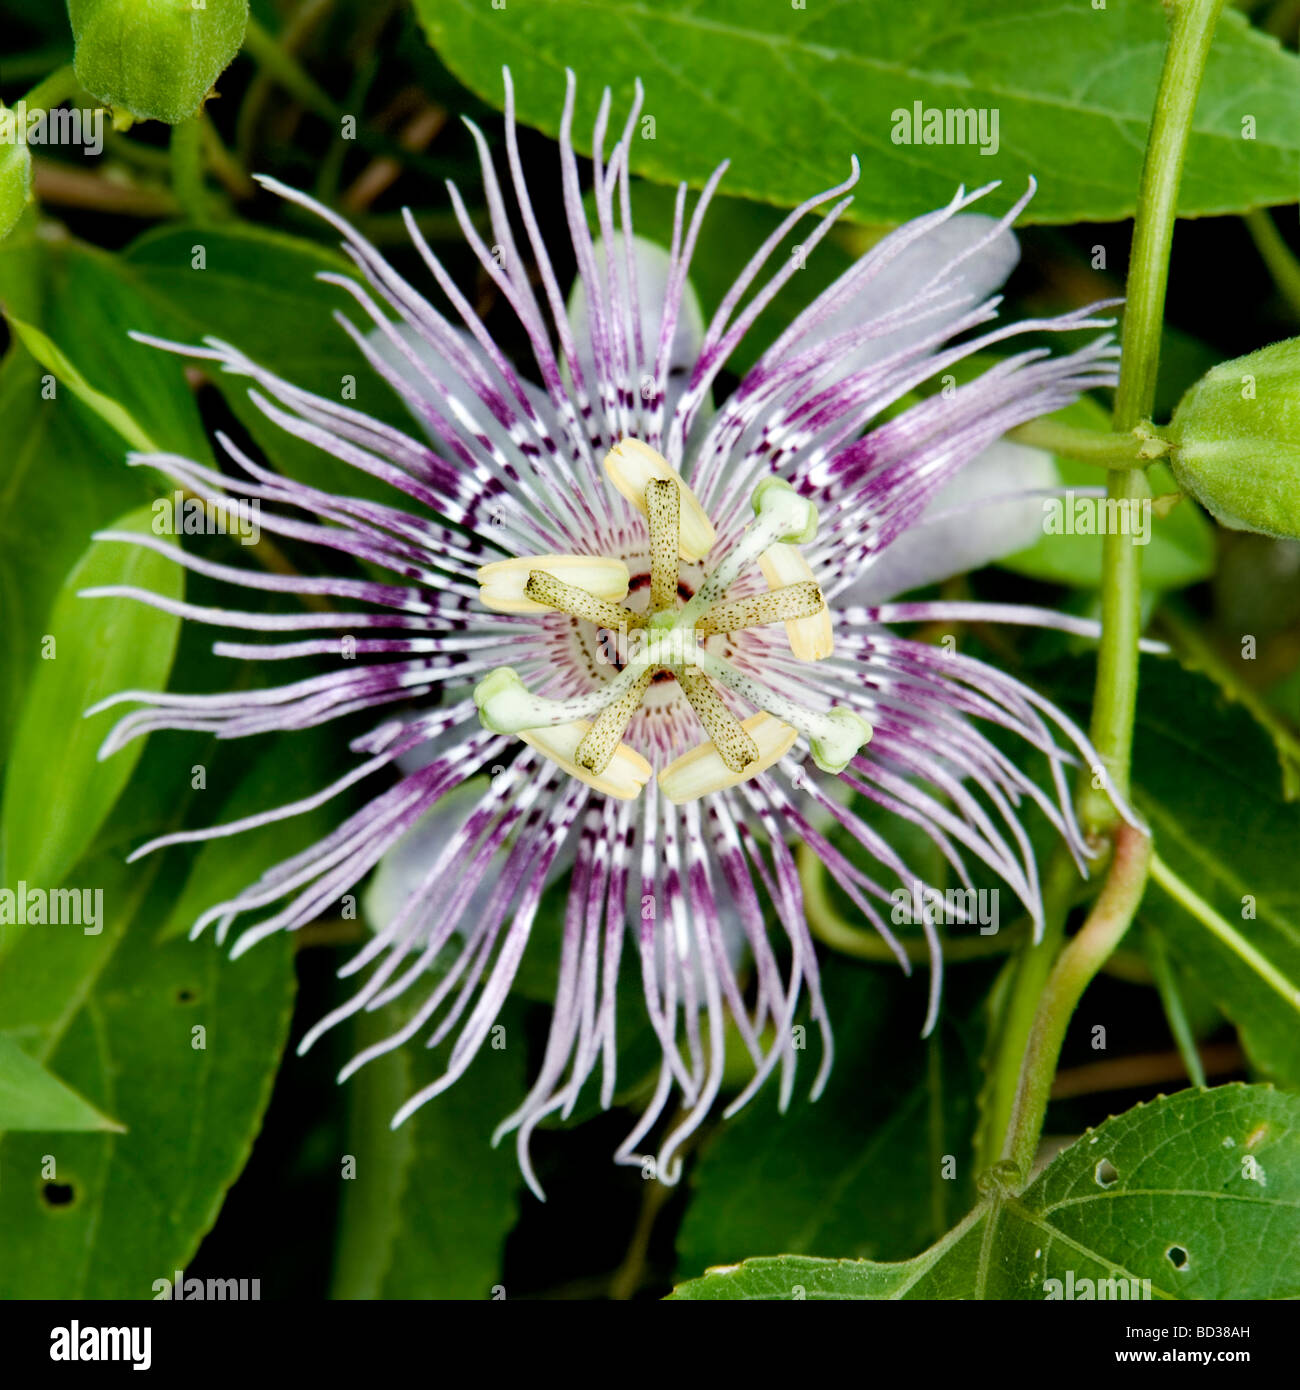 Close up of a beautiful passionflower bloom Stock Photo